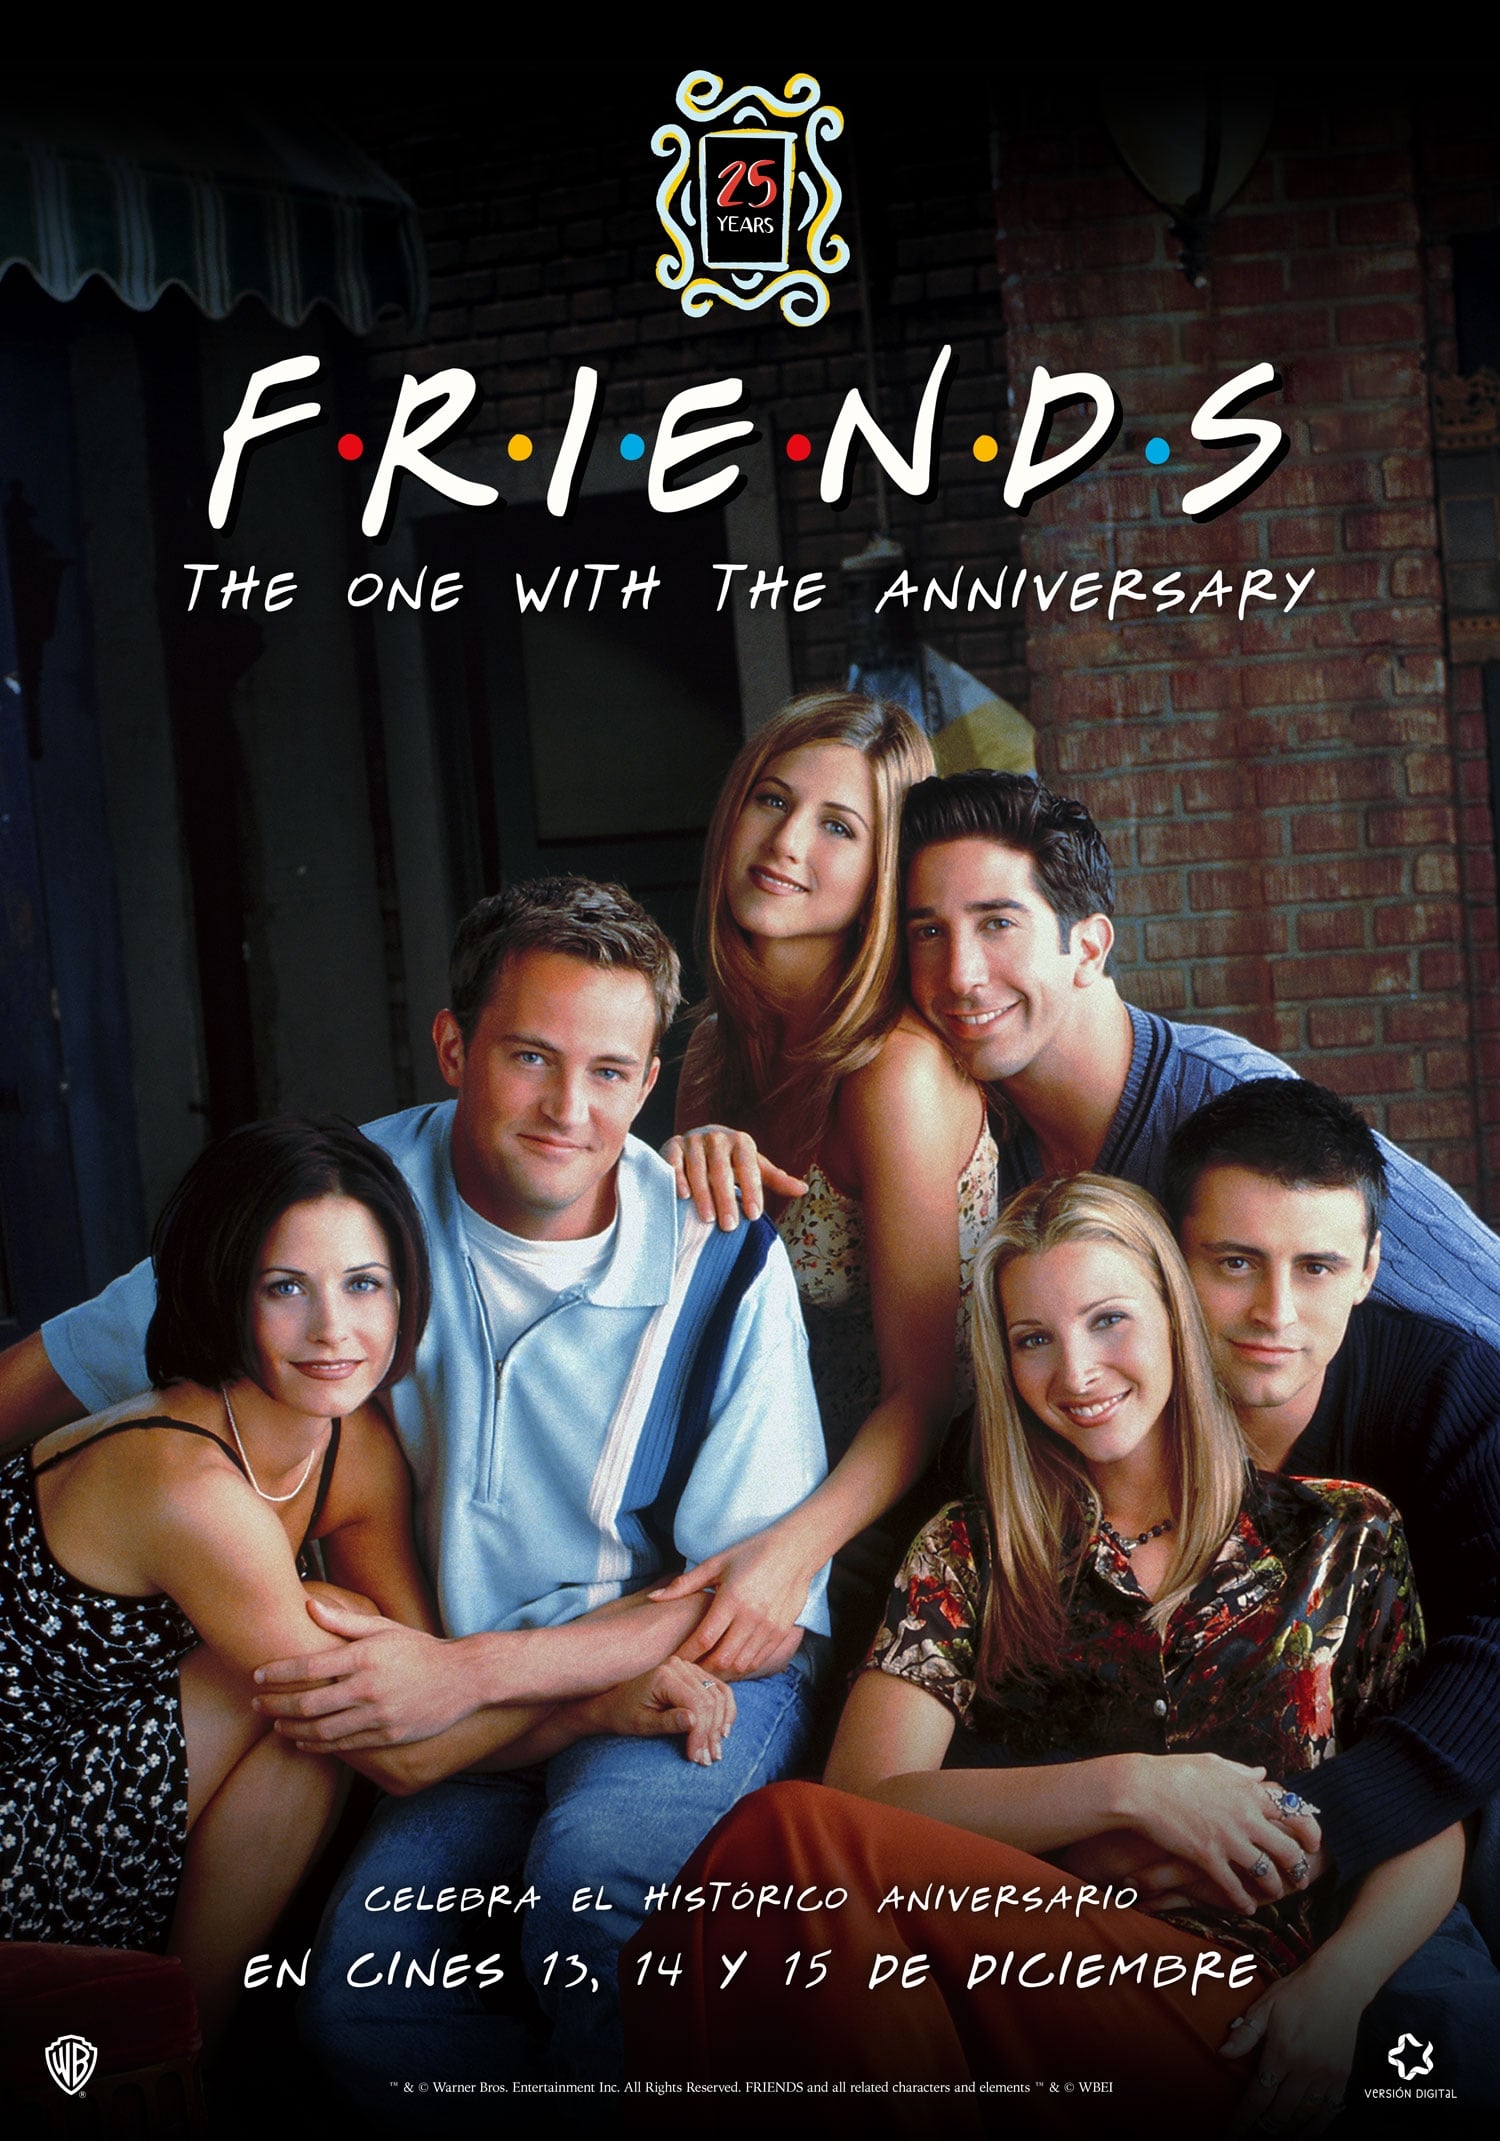 Friends 25th: The One with the Anniversary (2019)